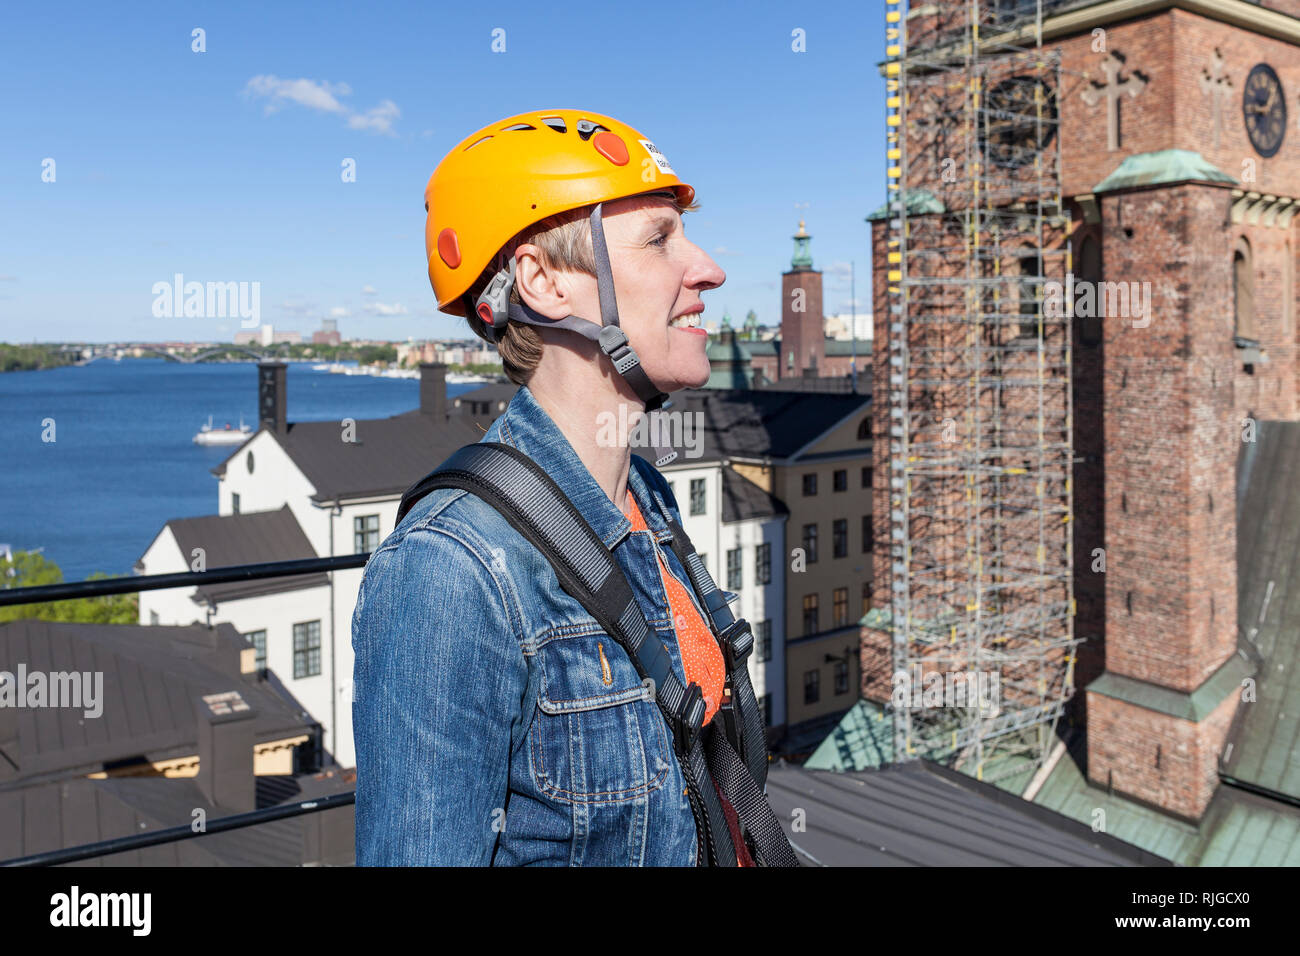 Woman on a tour of the city roofs. Stock Photo